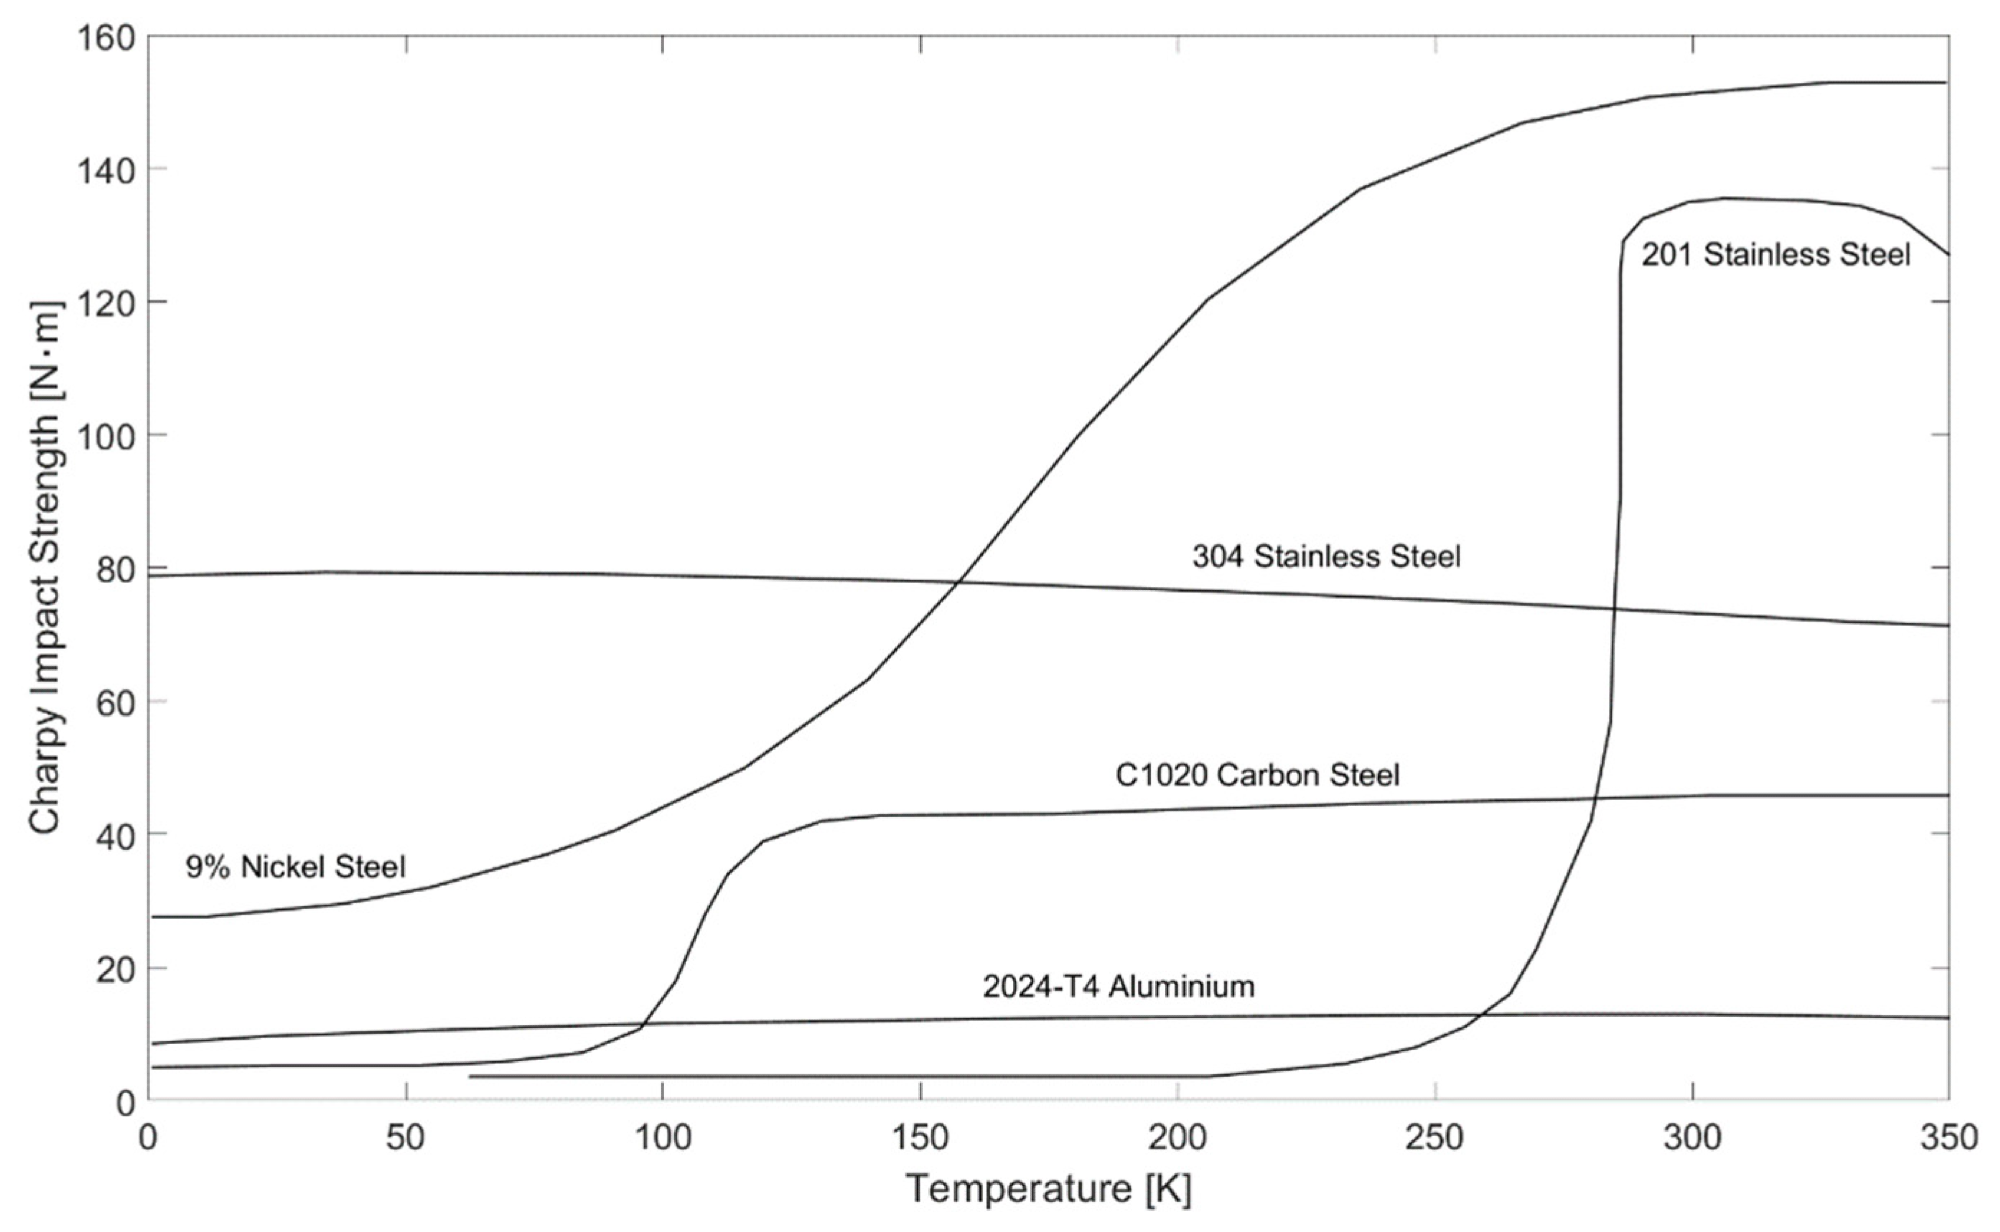 Charpy impact strength as a function of temperature for various materials based on [30].